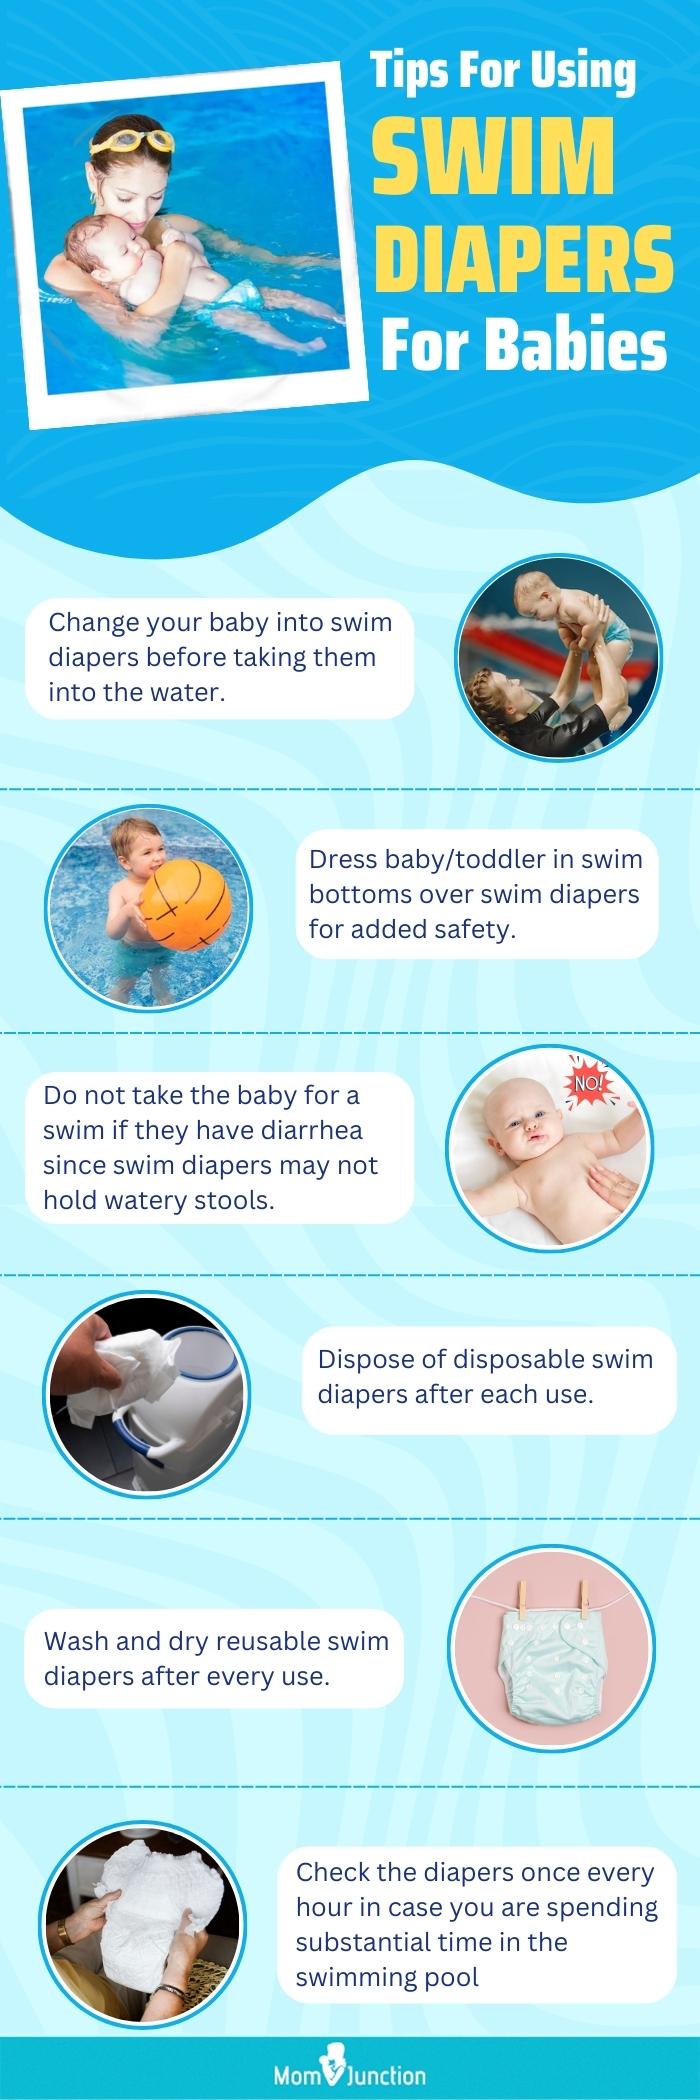 https://www.momjunction.com/wp-content/uploads/2019/06/Tips-For-Using-Swim-Diapers-For-Babies-Row-1440-Content-Topics.jpg